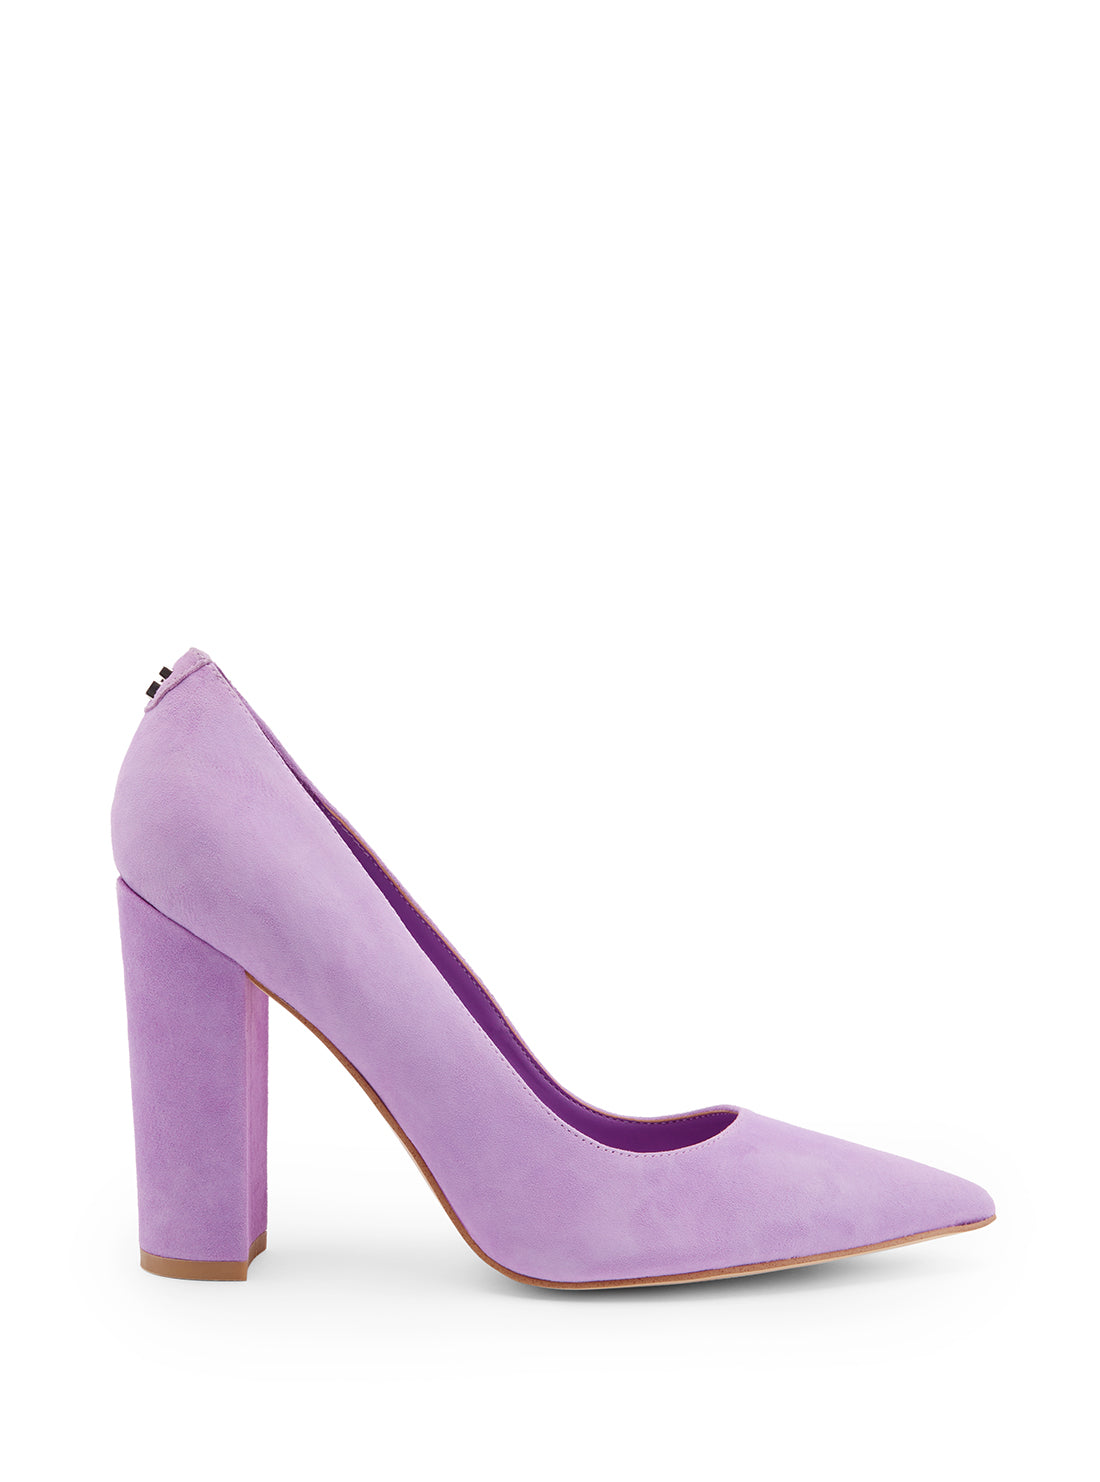 GUESS Women's Purple Abagail Suede Pumps ABAGAIL Side View